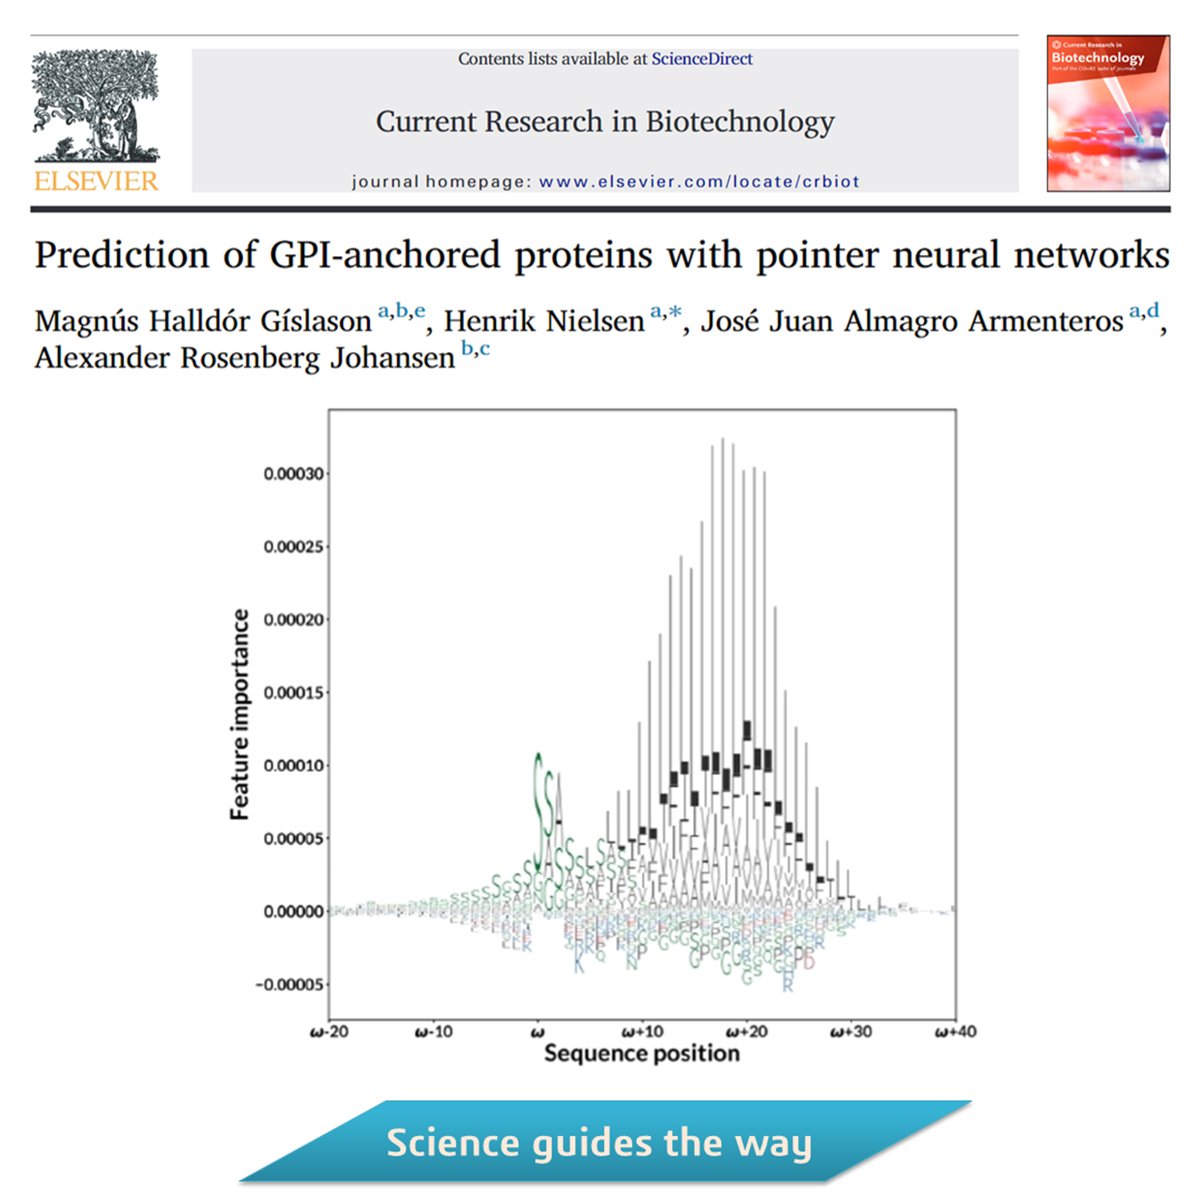 Prediction of GPI-anchored proteins with pointer neural networks  

inpst.net/prediction-of-…

#CRBIOTECH #MedTwitterAI @erlesen @HealthyFellow @MarcoAlbuja @ShraboniGhosal @nathantwala @anjbth @deNutrients @PepperPell
More from #DHPSP, INPST, and CRBIOTECH: linkedin.com/pulse/social-m…